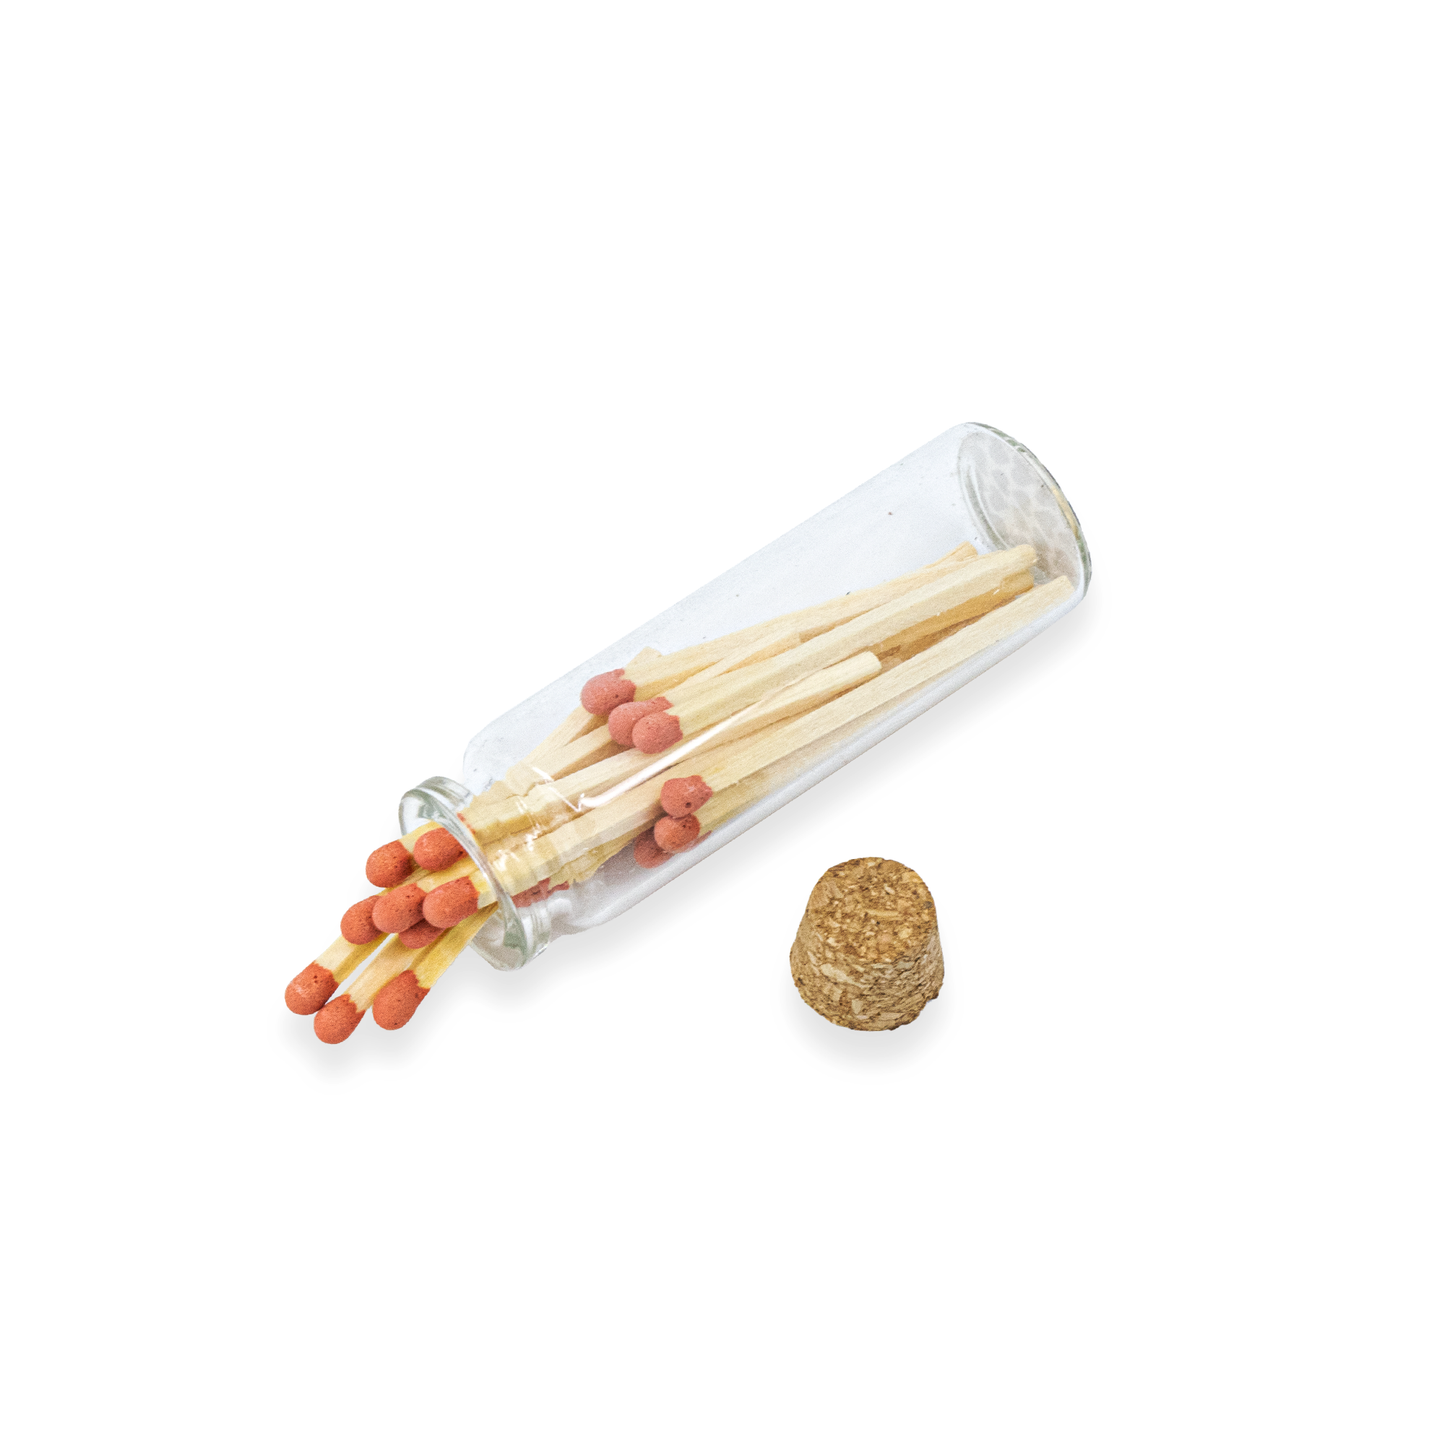 Small Match Bottles - Safety Matches in Jars with Striker: Mixed Colors / 20 Matchsticks Jar